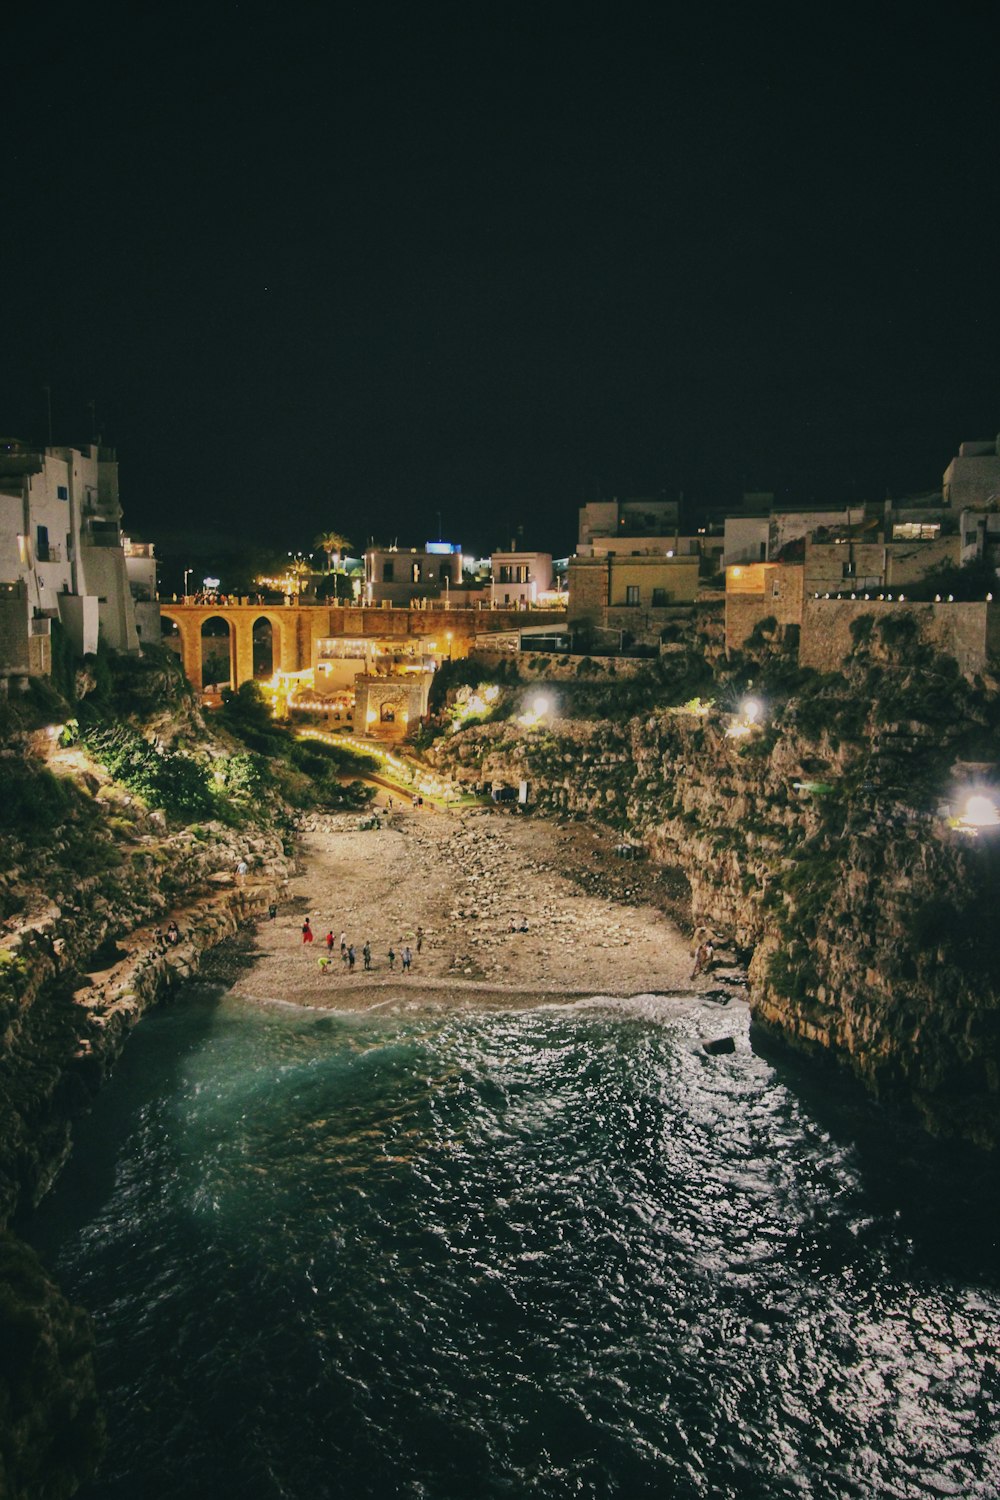 a night view of a beach with a city in the background